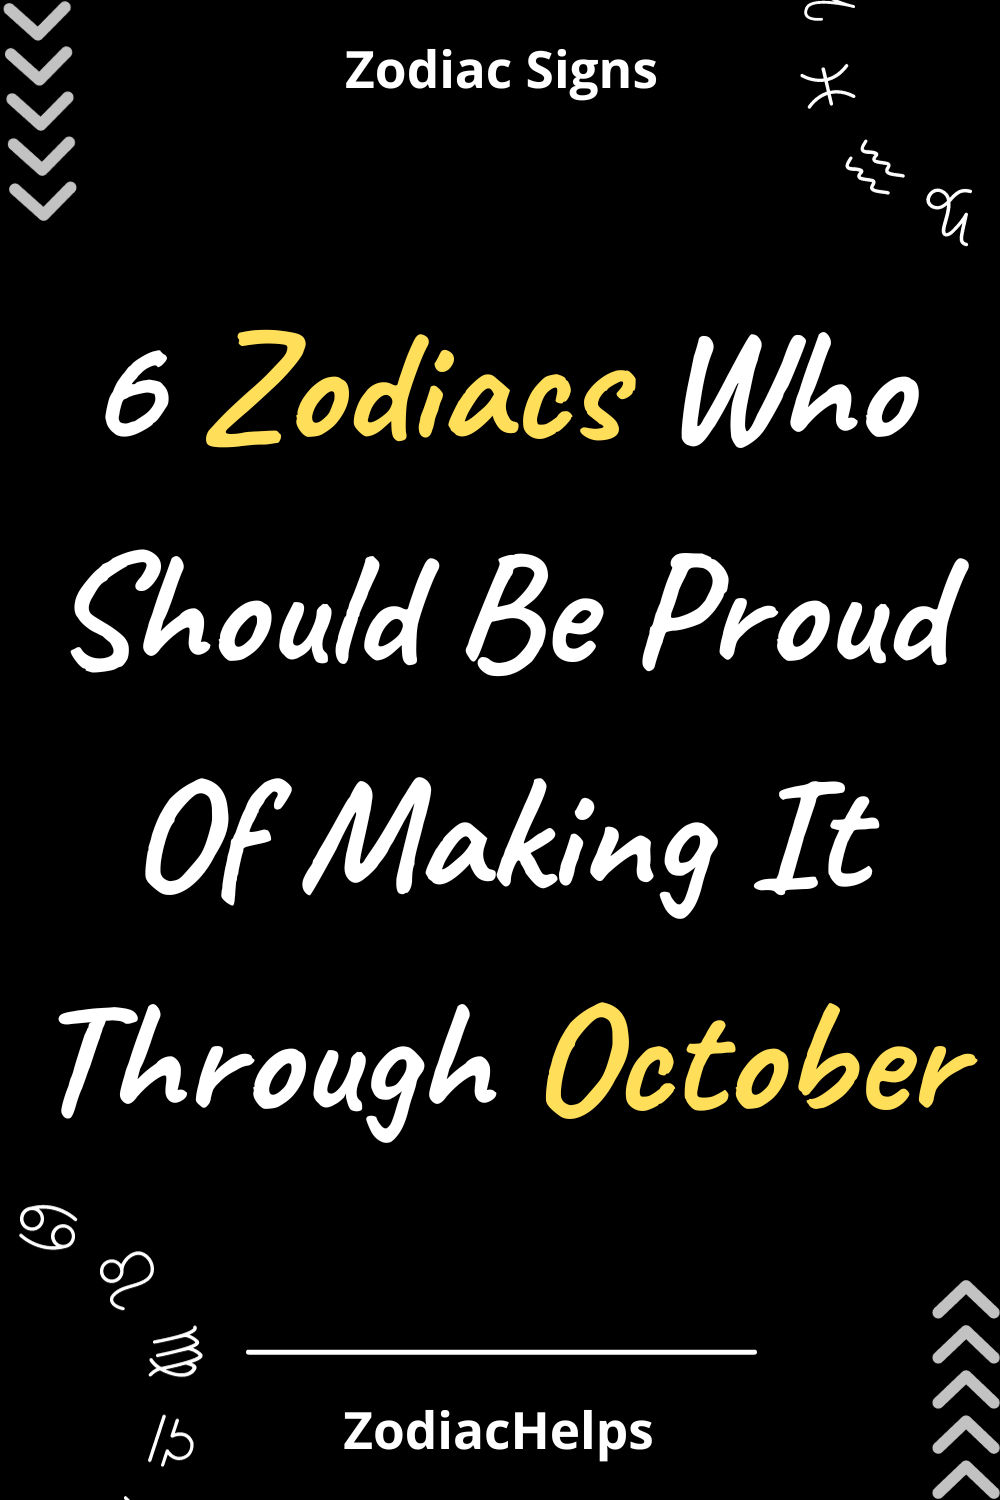 6 Zodiacs Who Should Be Proud Of Making It Through October